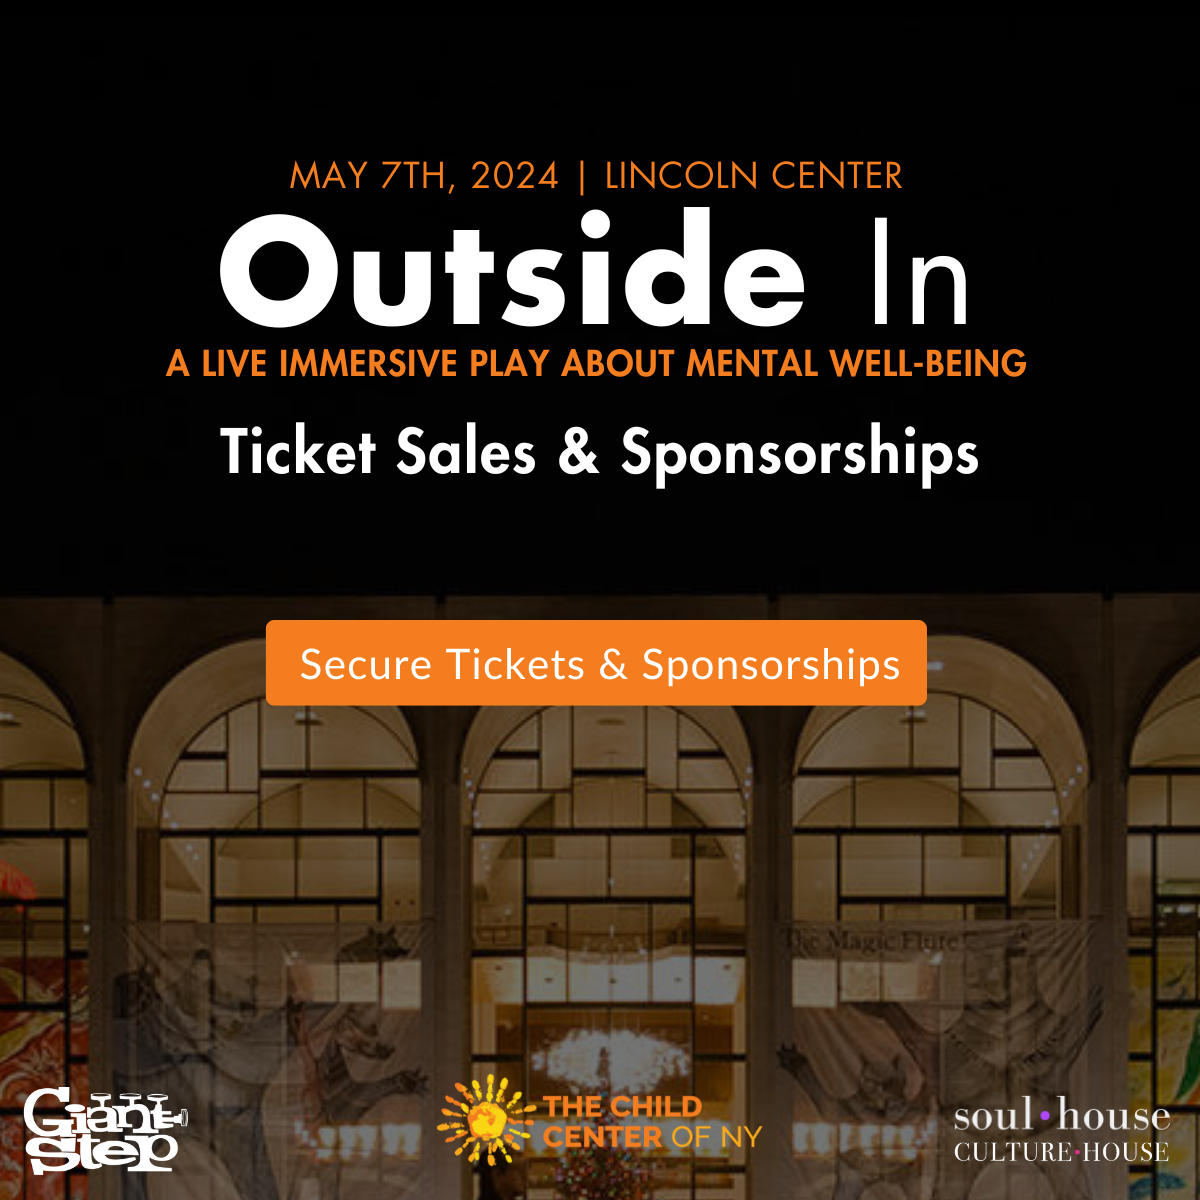 Secure tickets and sponsorships